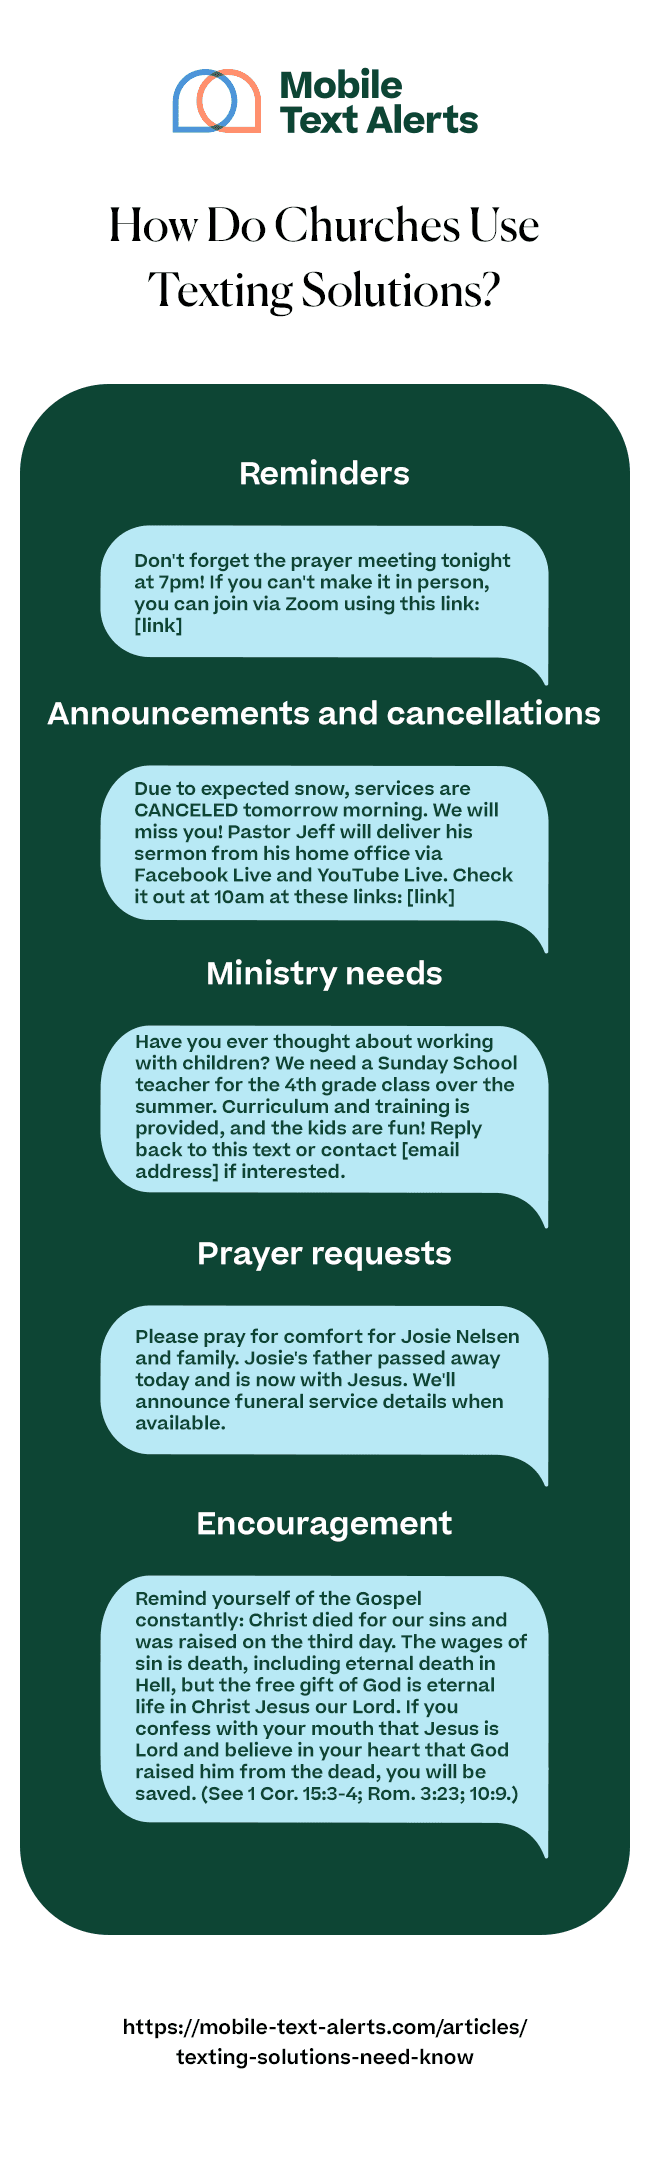 How do churches use texting solutions